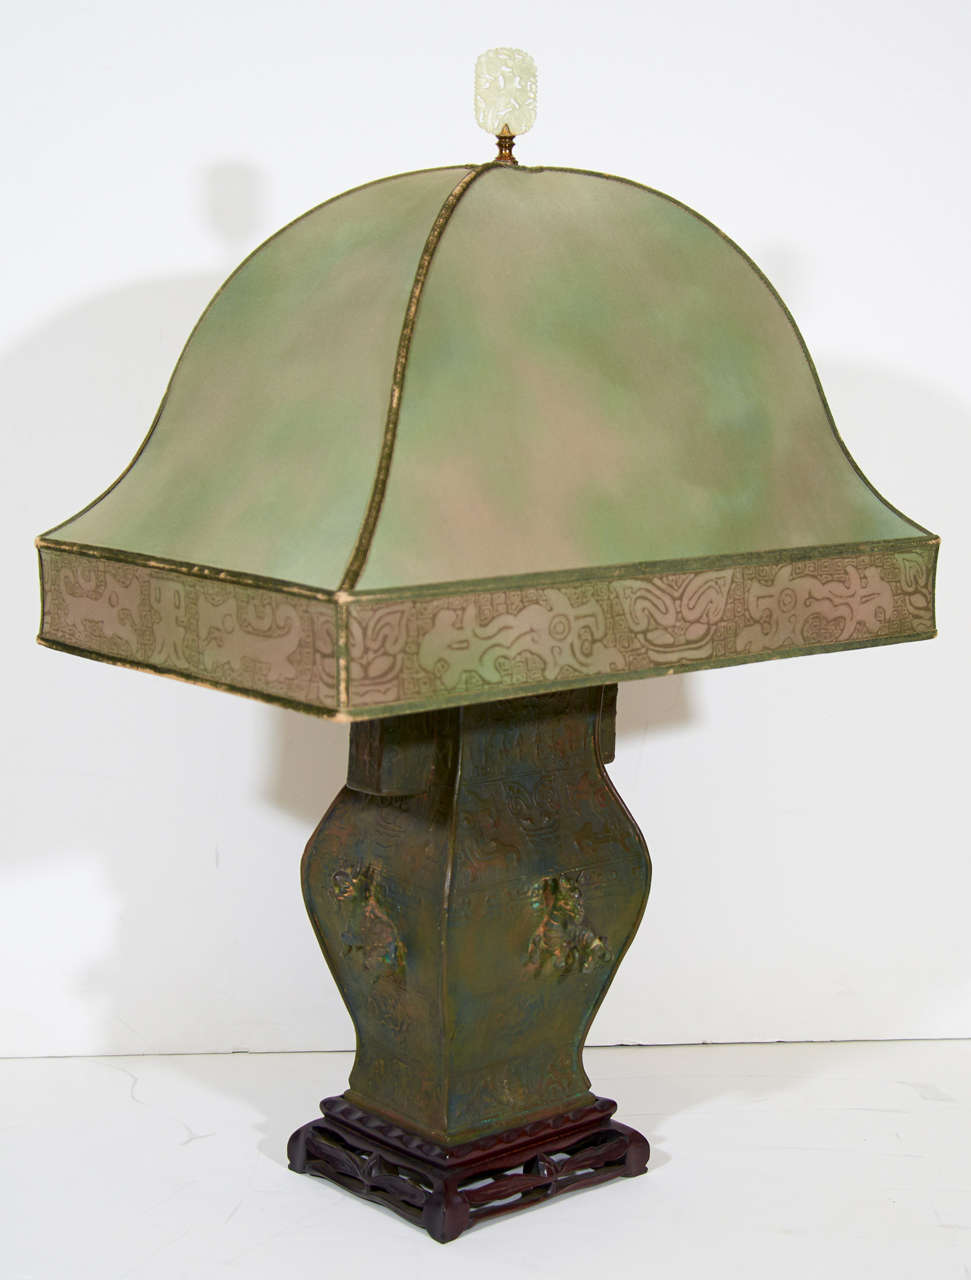 A pair of c. 1920's Chinese patinated bronze table lamps on carved rosewood bases with jade finials and later addition Asian inspired American shades (c. 1940's). They have age appropriate patina and wear to shades and bodies.